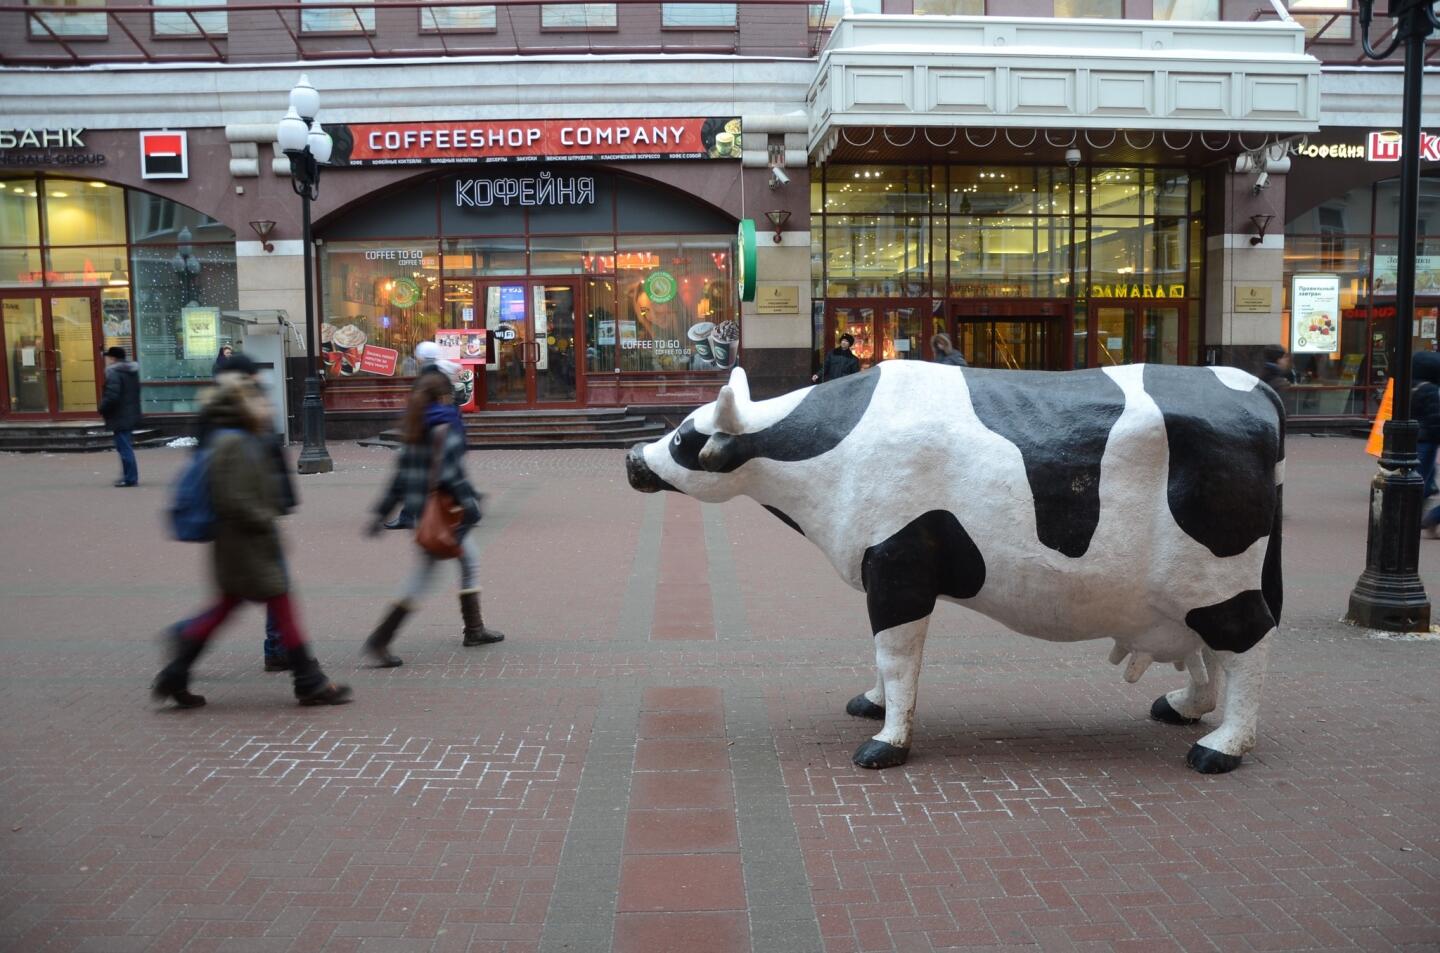 Russia: the livestock stops here